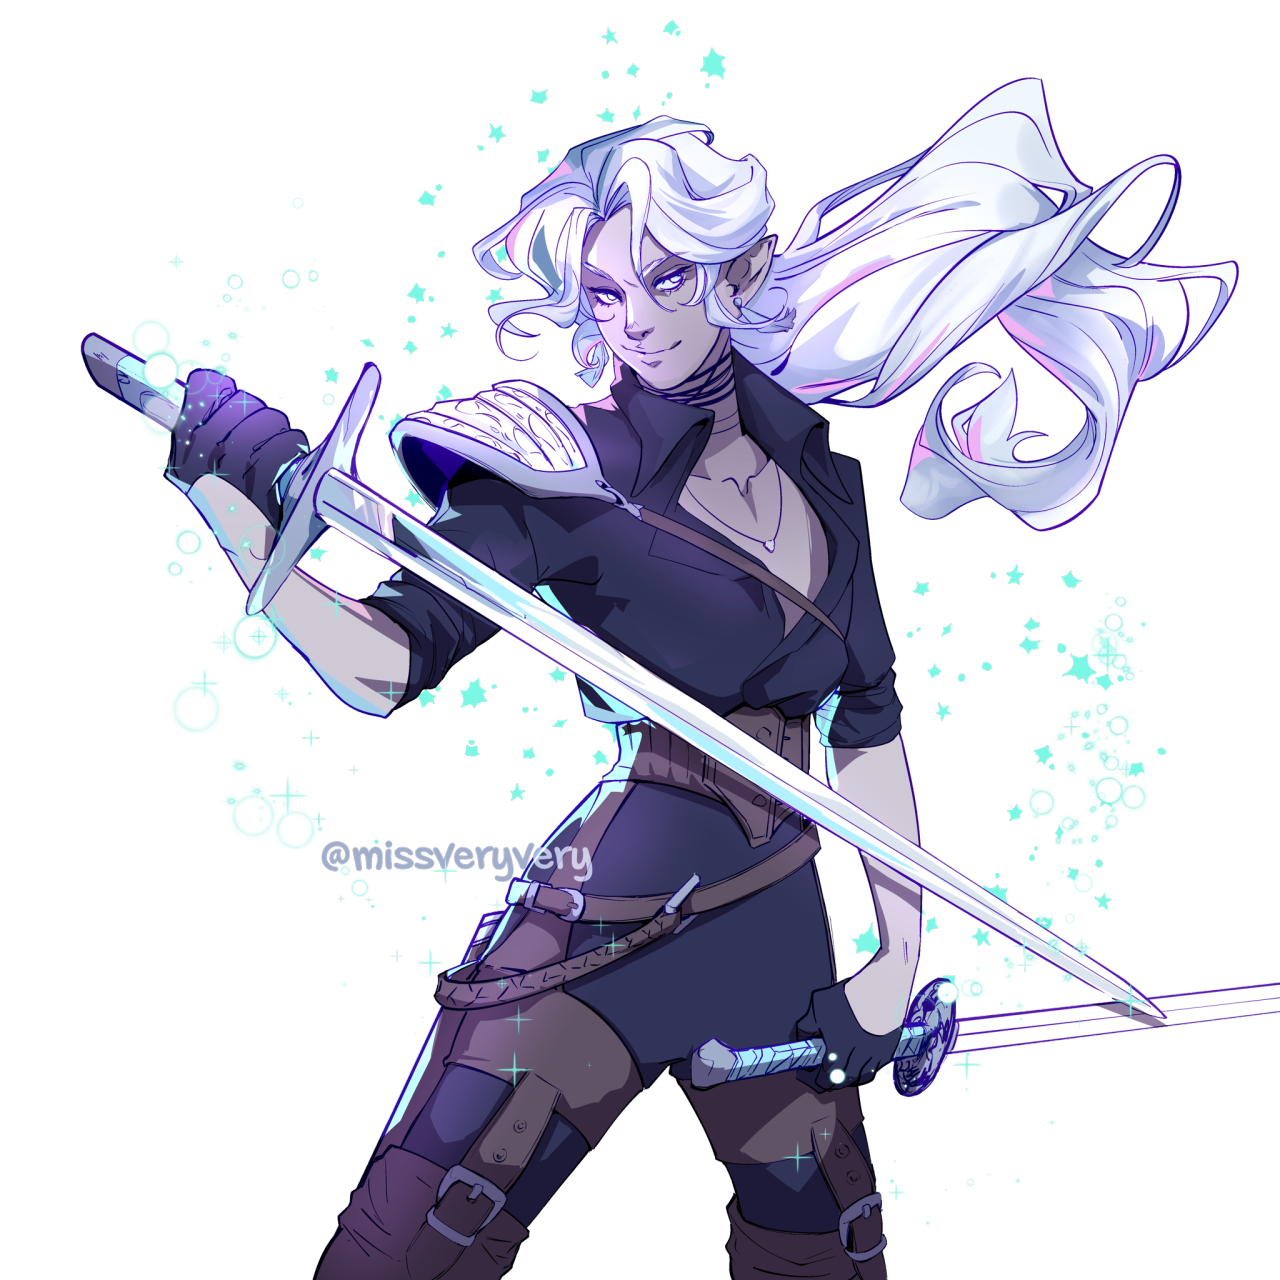 Jens Lyndelle from Trinyvale/Naddpod. A high elf with pale skin and long white hair. He's holding two swords.